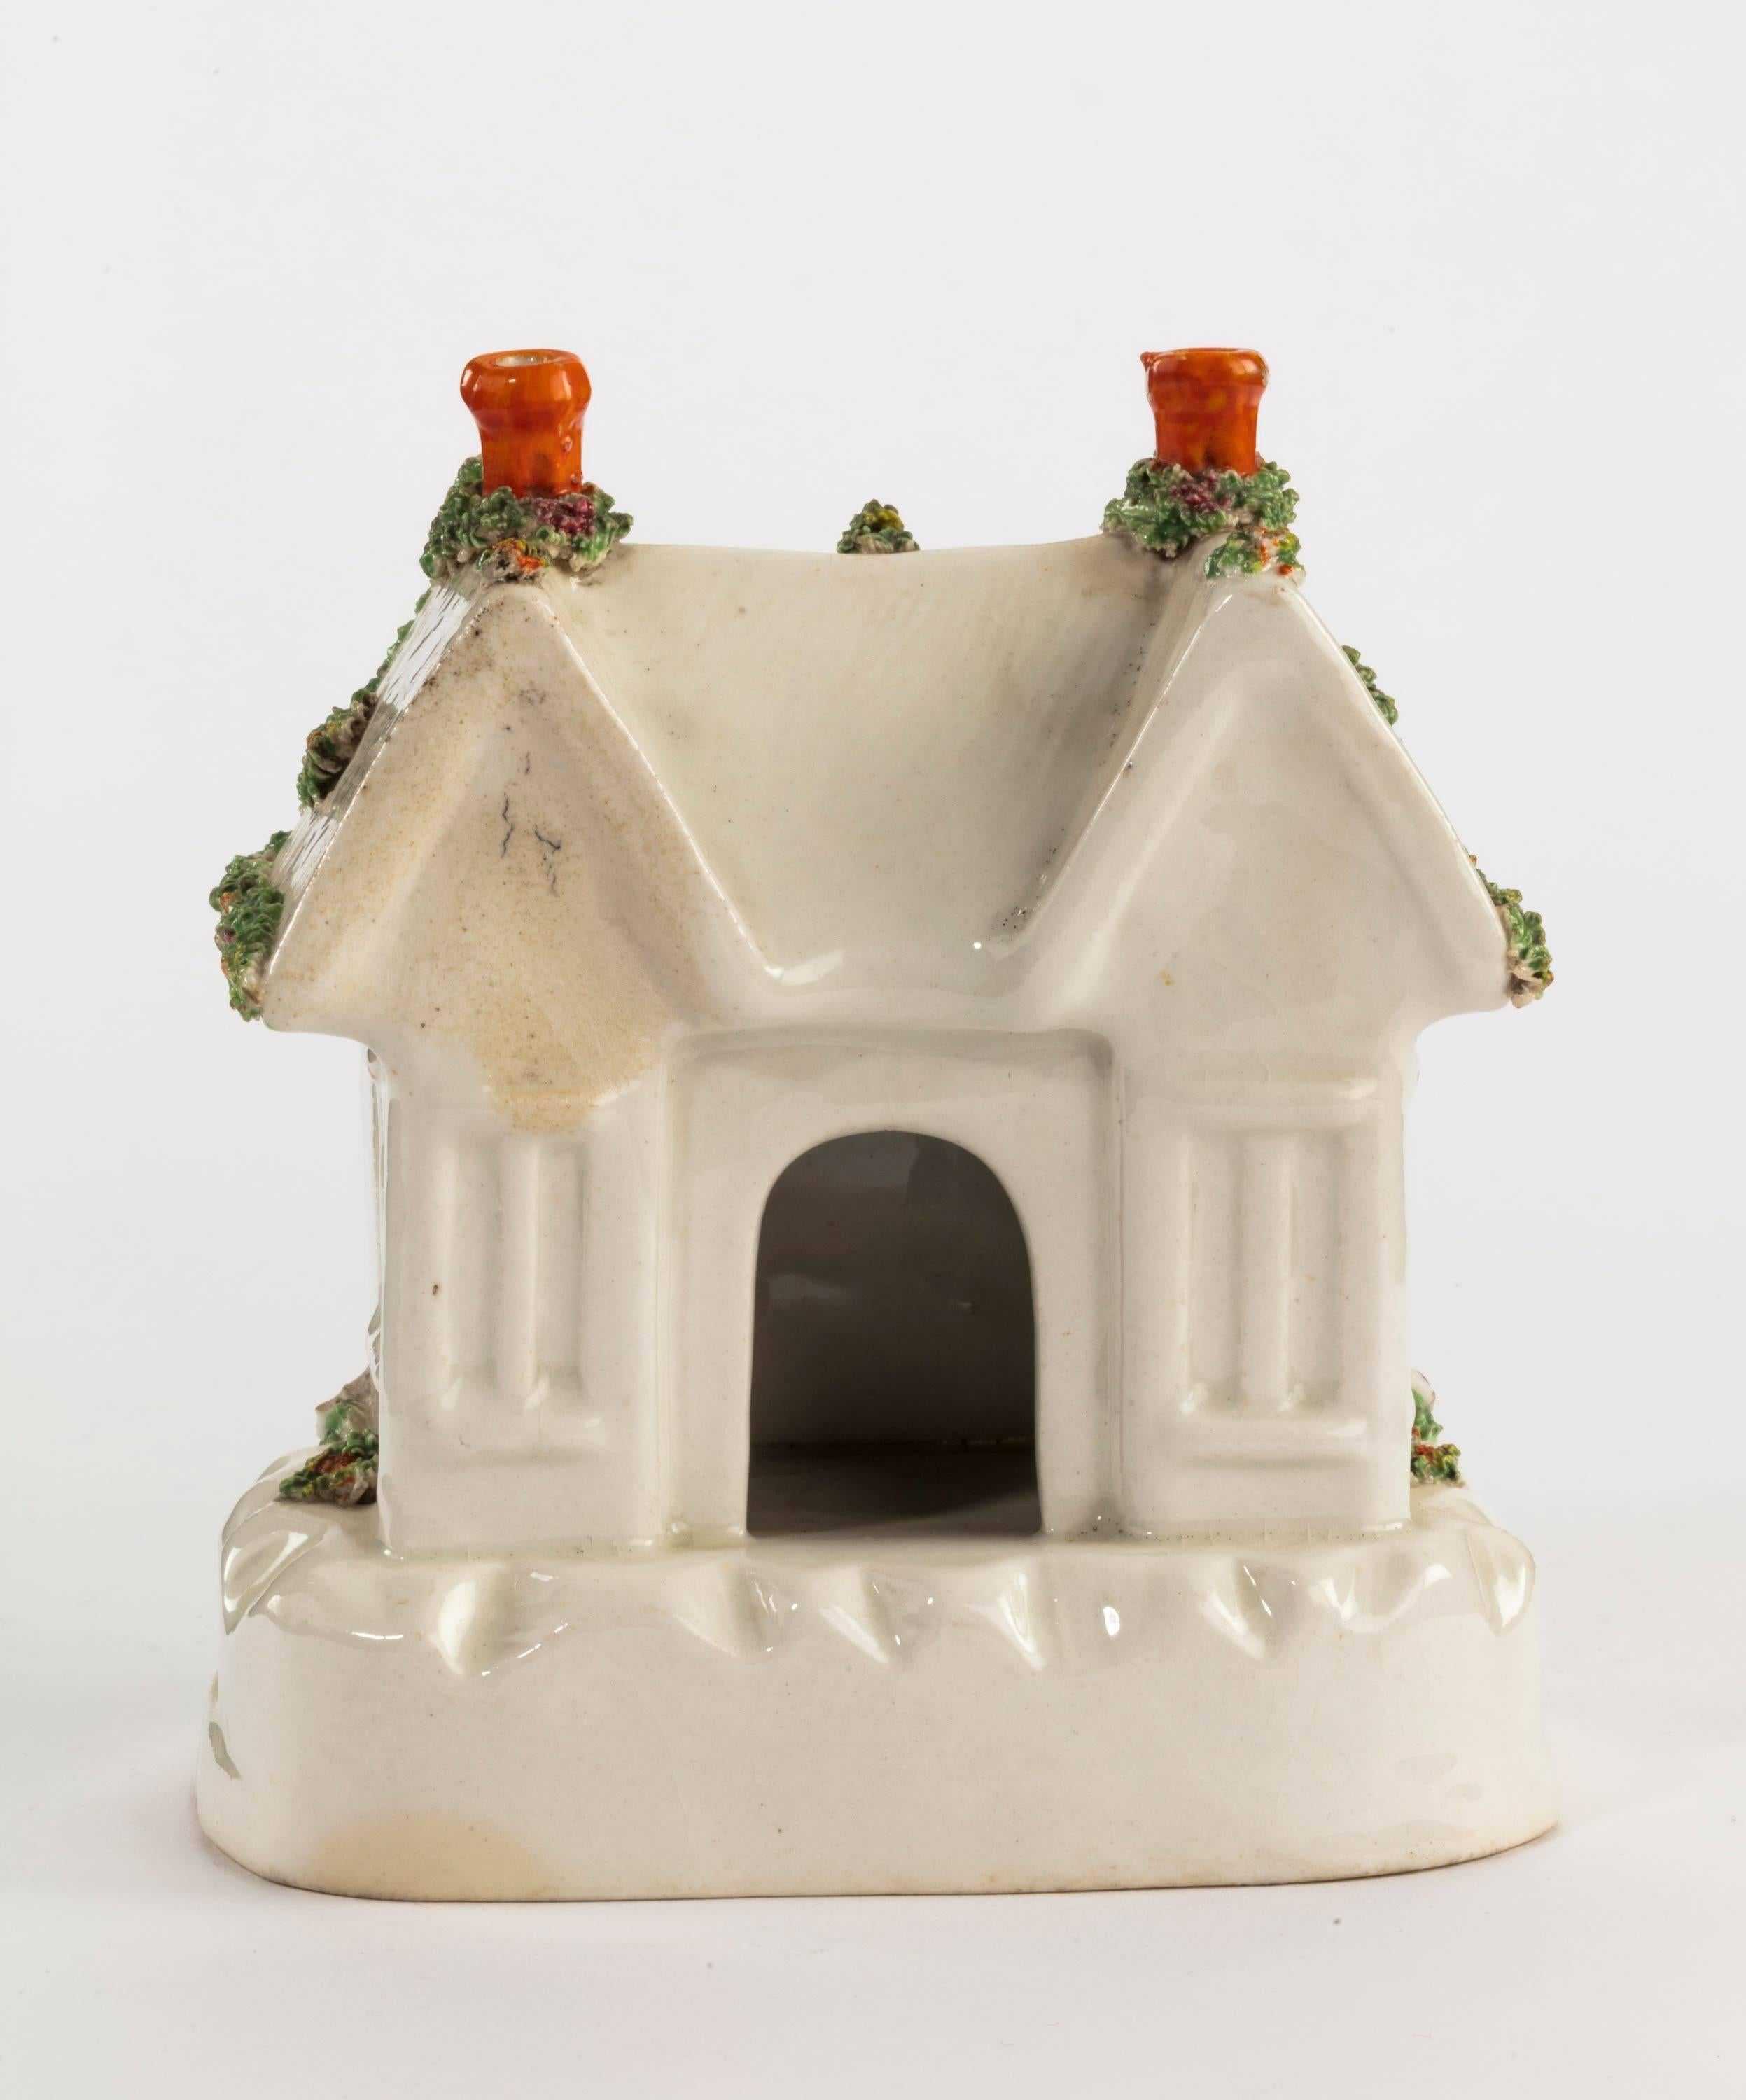 Staffordshire pottery pastille burner in the form of a house.